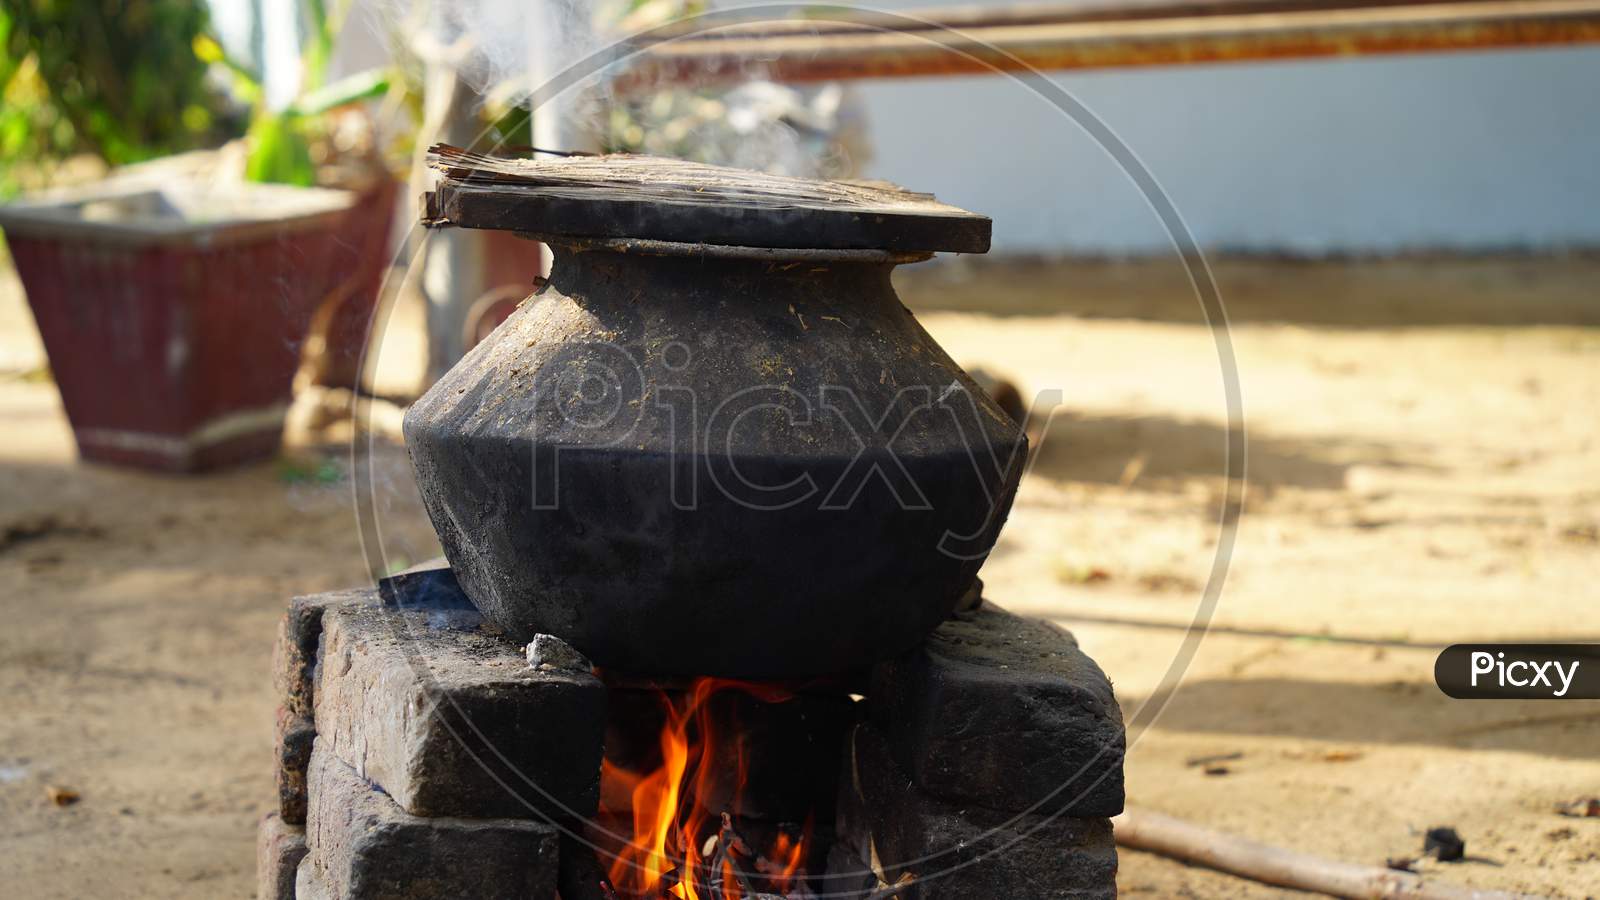 Pottery With Wood Stove On Traditional Kitchen Native Country Of India. Natural Clay Stove Or Brick Stove With Wooden Sticks.